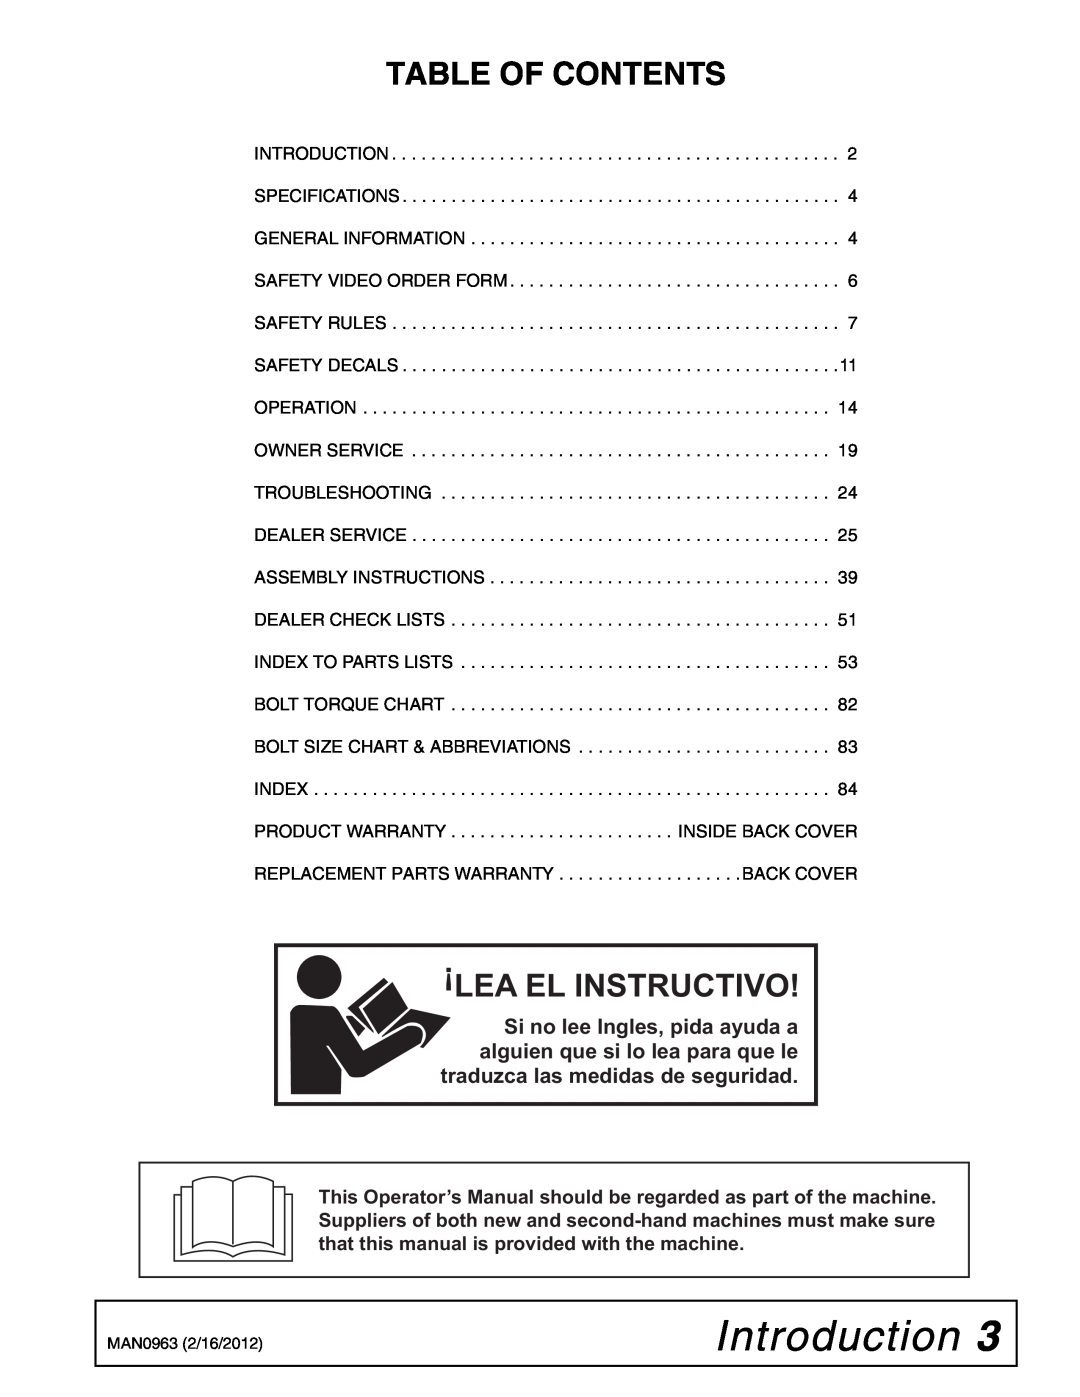 Woods Equipment BW180XHDQ, BW126XHDQ manual Introduction, Table Of Contents, Lea El Instructivo 